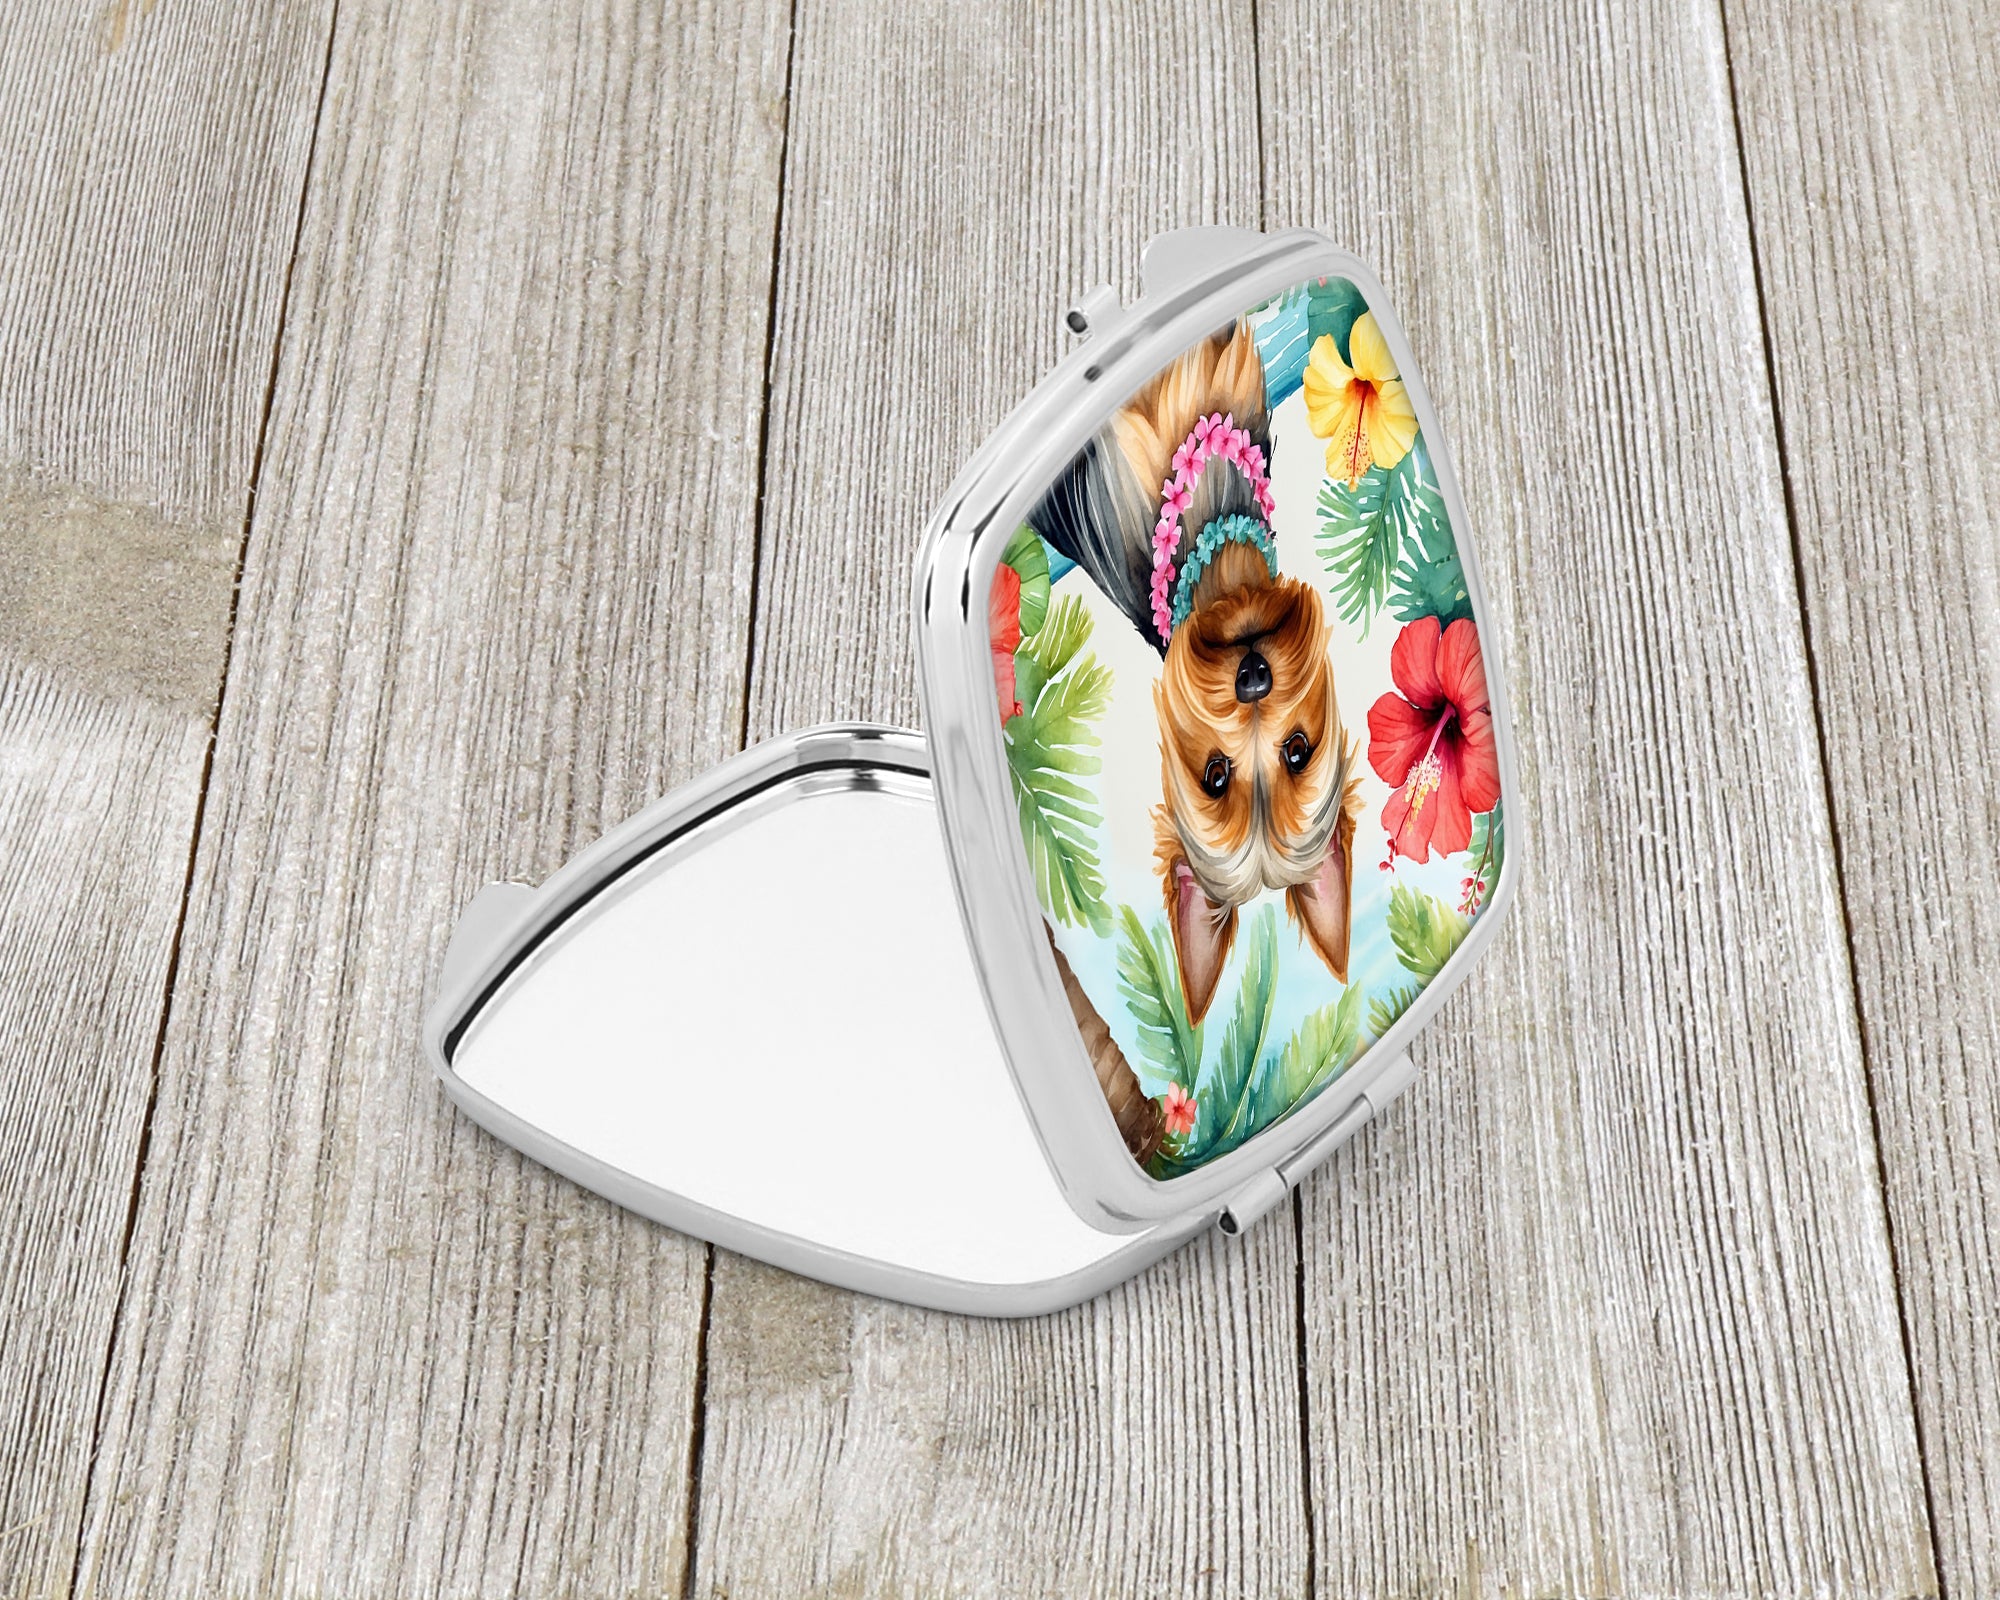 Buy this Silky Terrier Luau Compact Mirror